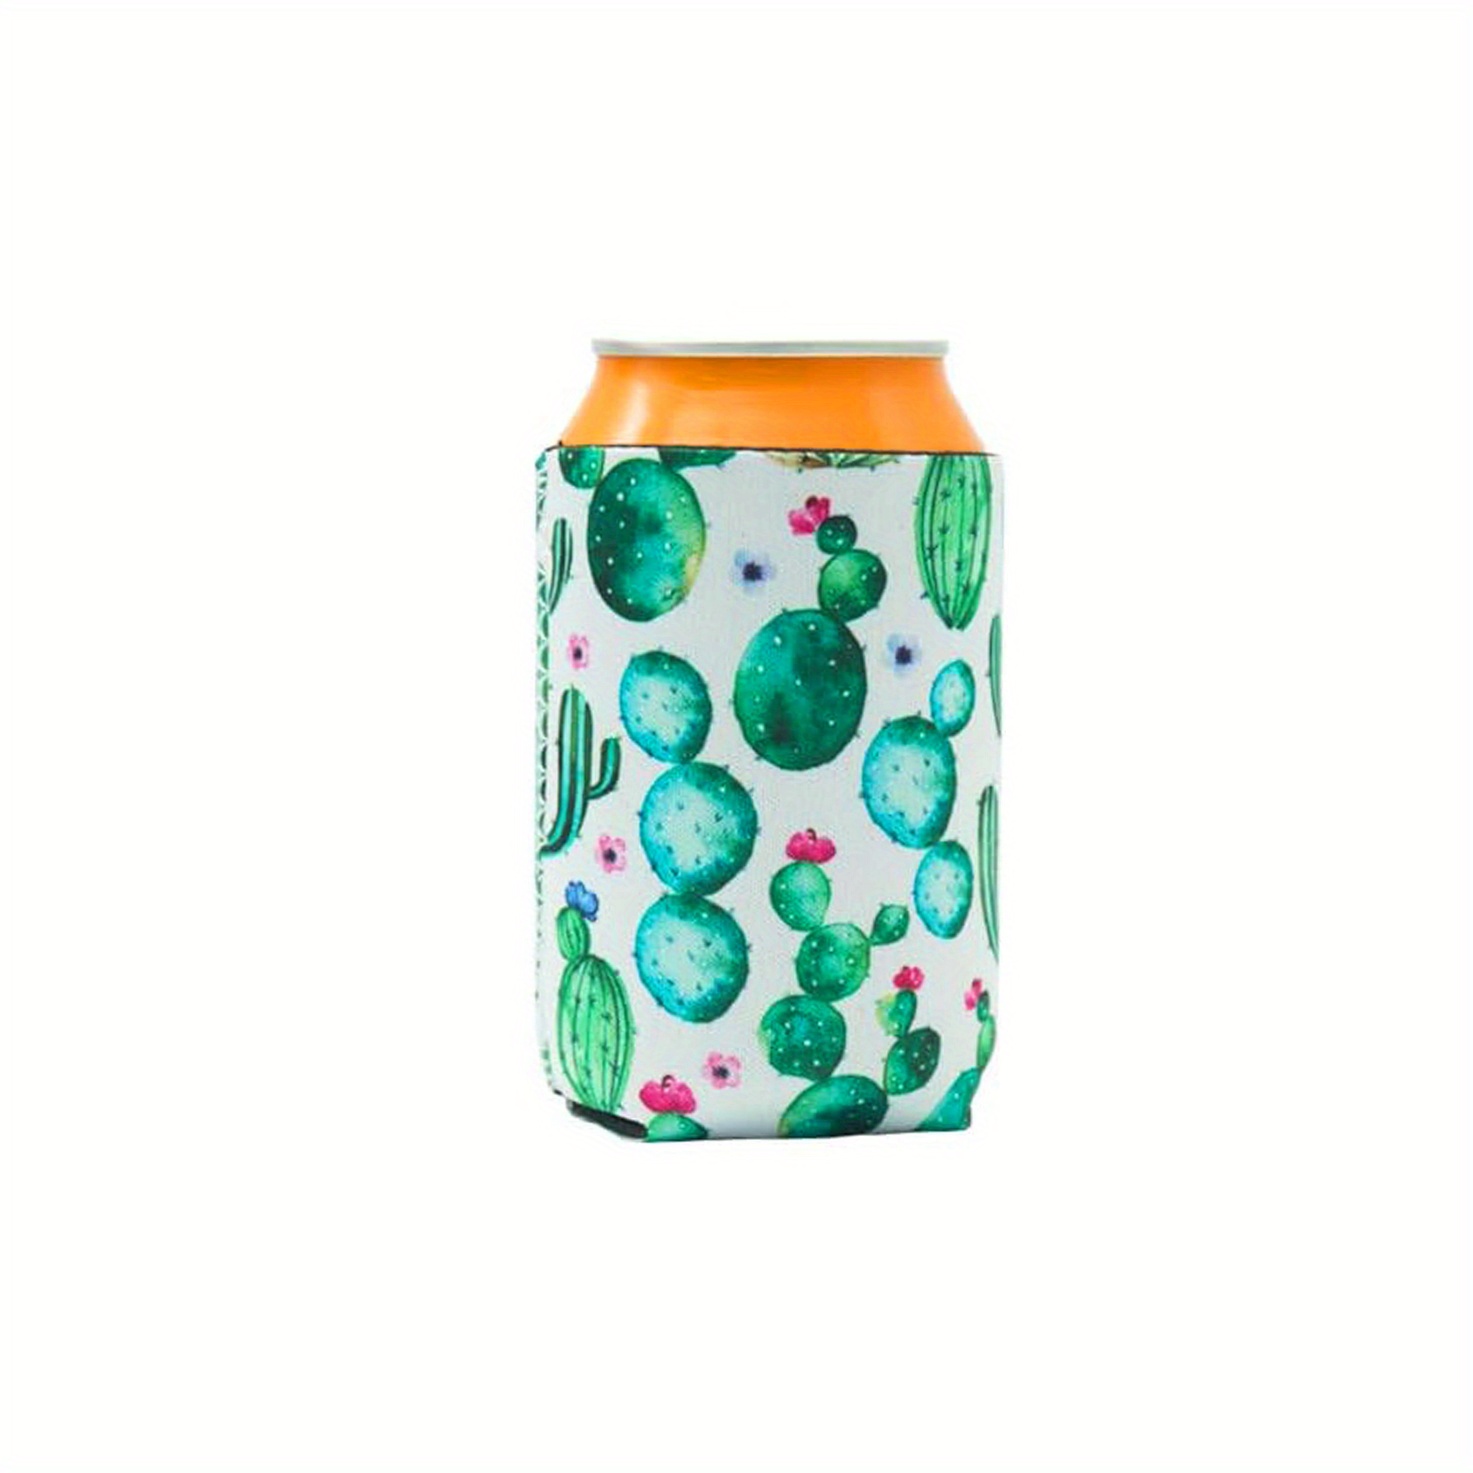 Rainbow Neoprene Slim Can Cooler For Skinny Can Coolers, Soft